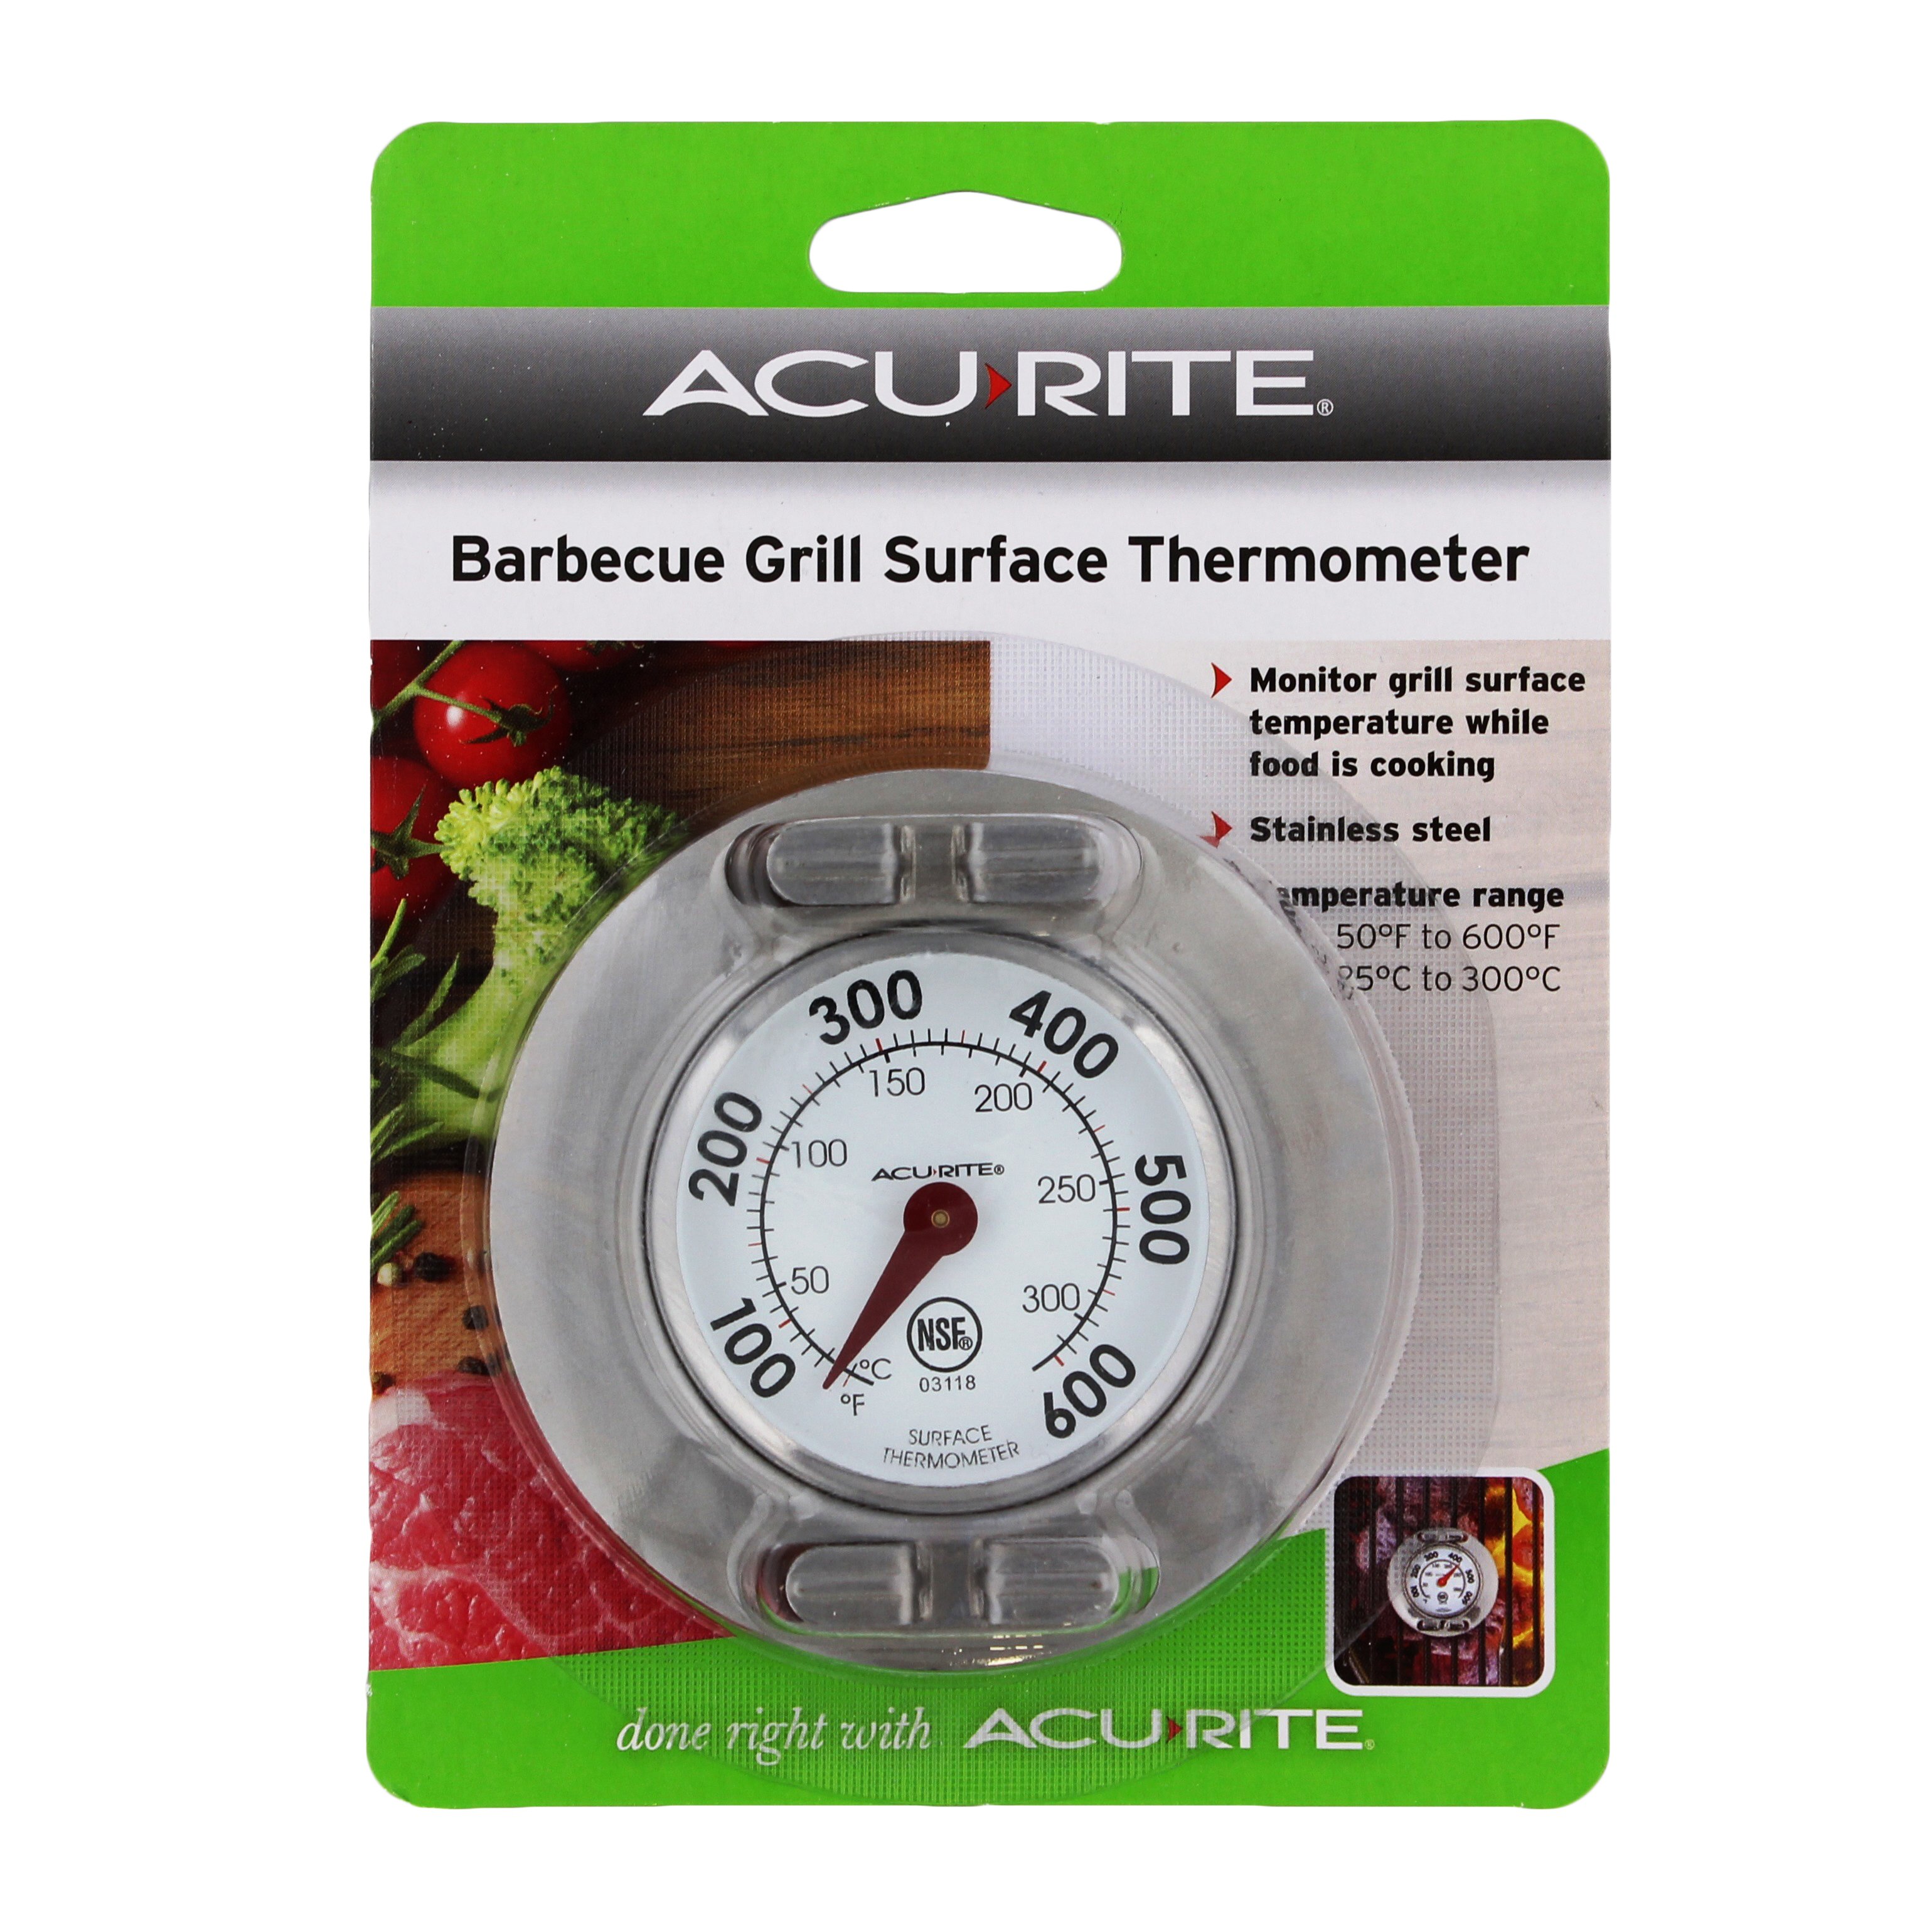 Ecolab Grill Surface Thermometer